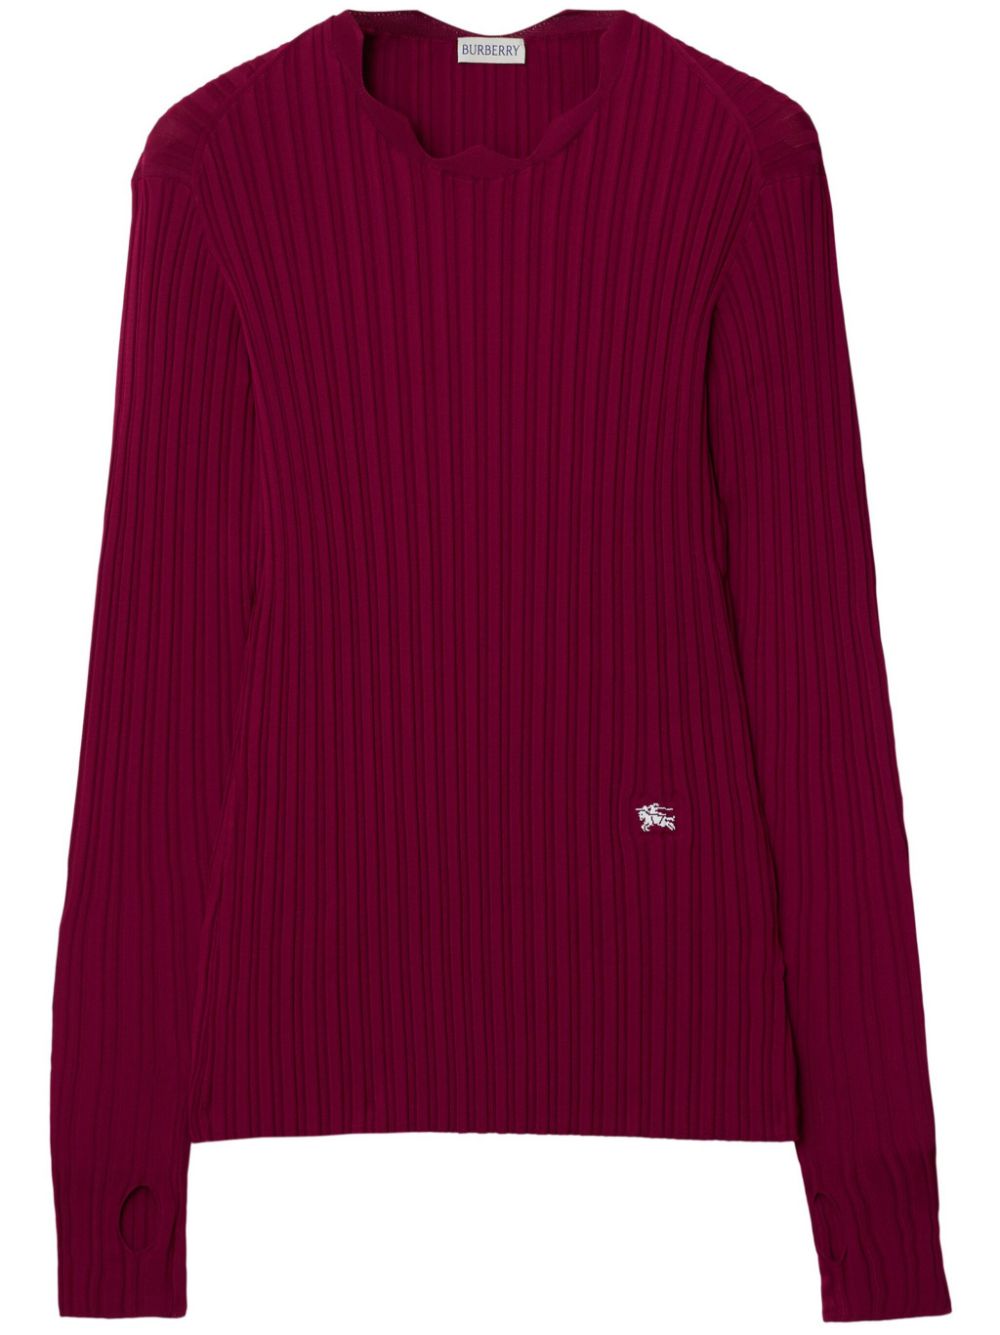 Burberry Equestrian Knight ribbed-knit top - Red von Burberry